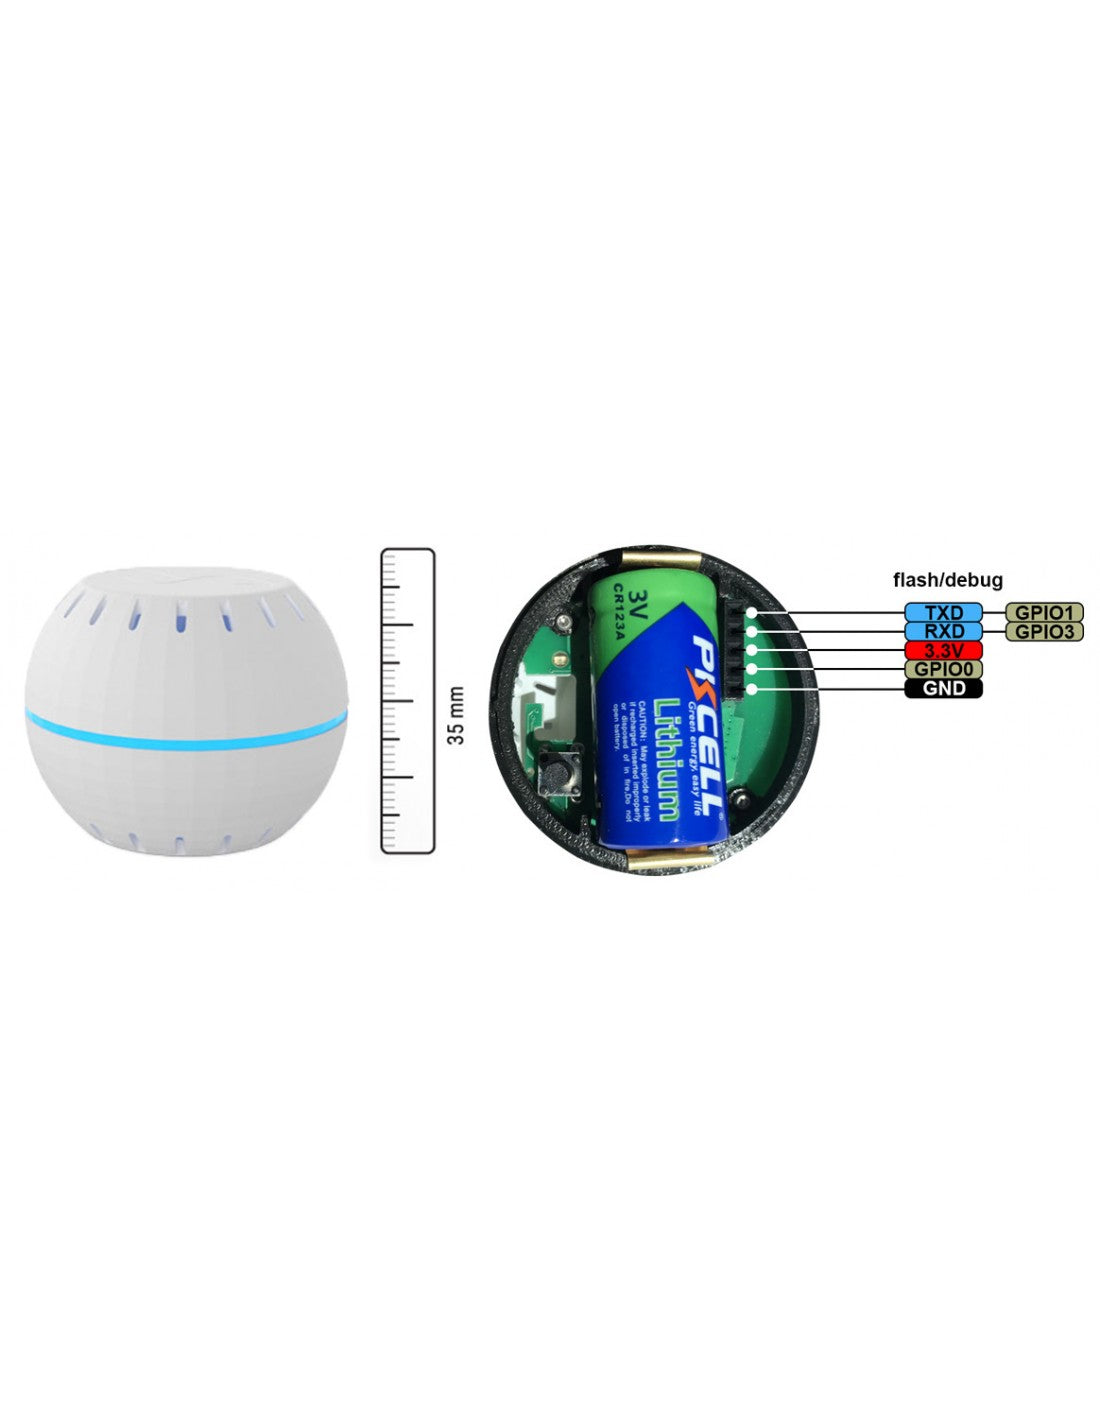 Shelly H&T WiFi Humidity and Temperature Sensor User Guide